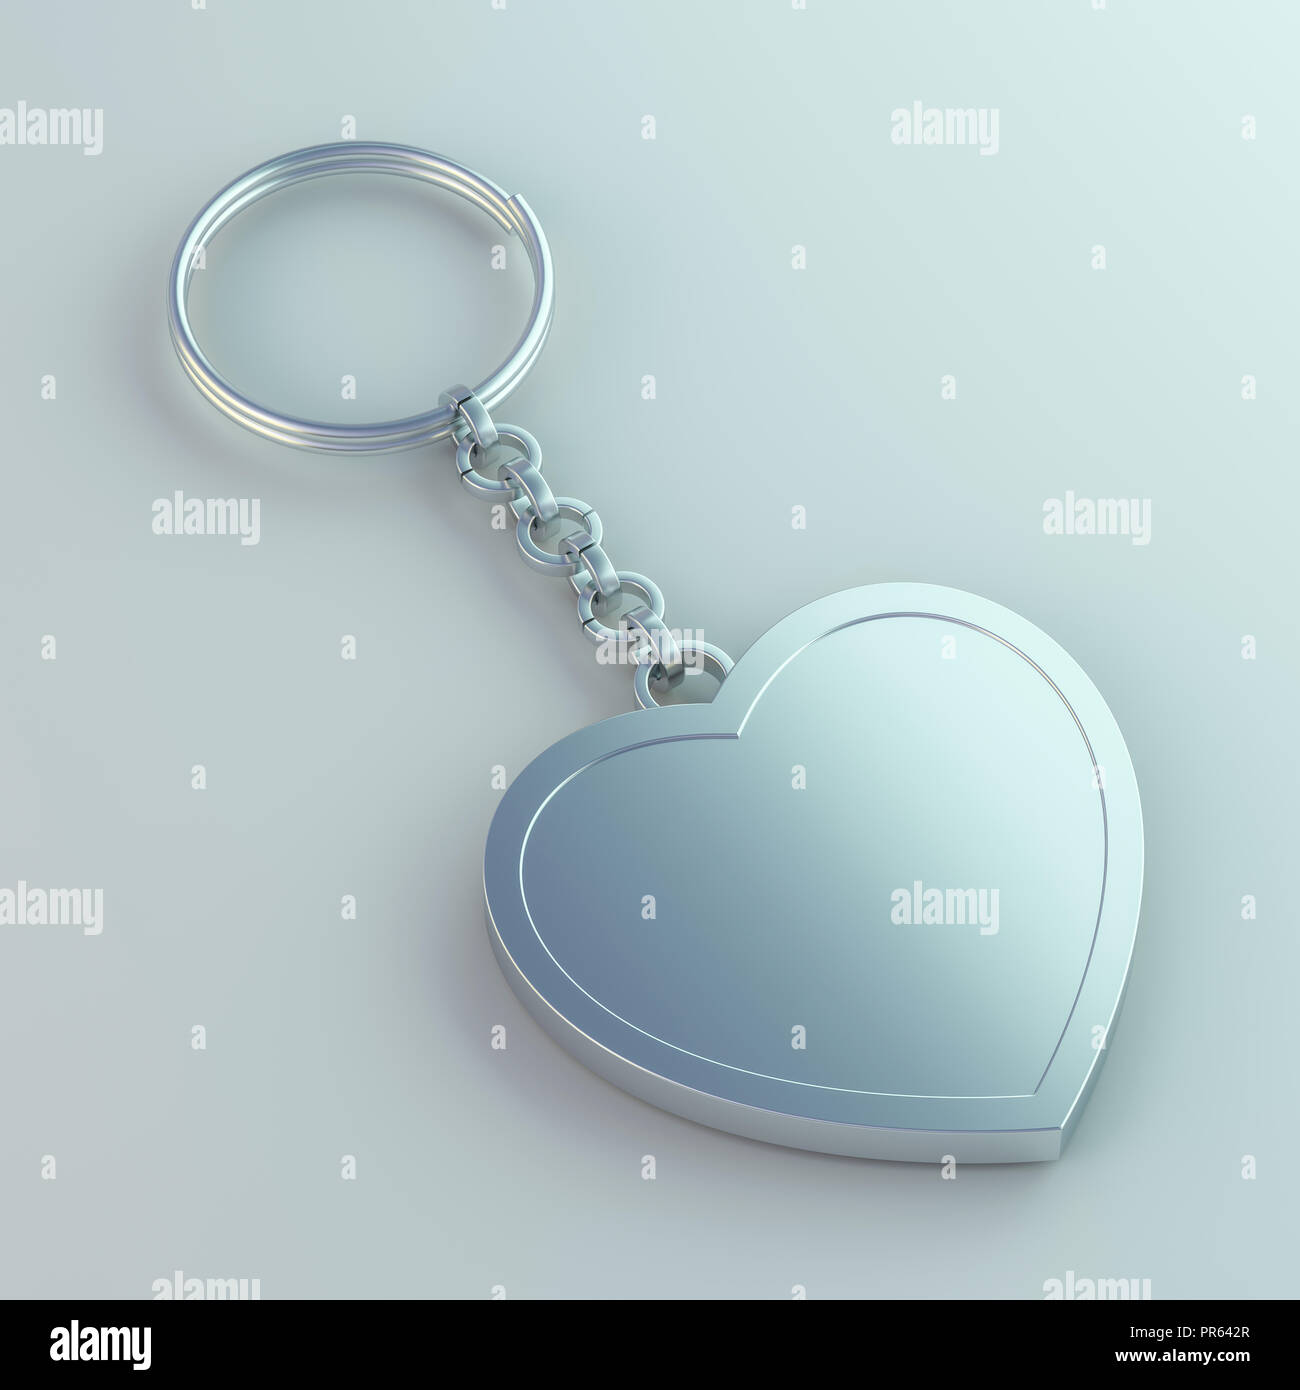 Free Vector  Blank keychains set. silver pendants with round, square,  heart and hexagon shapes